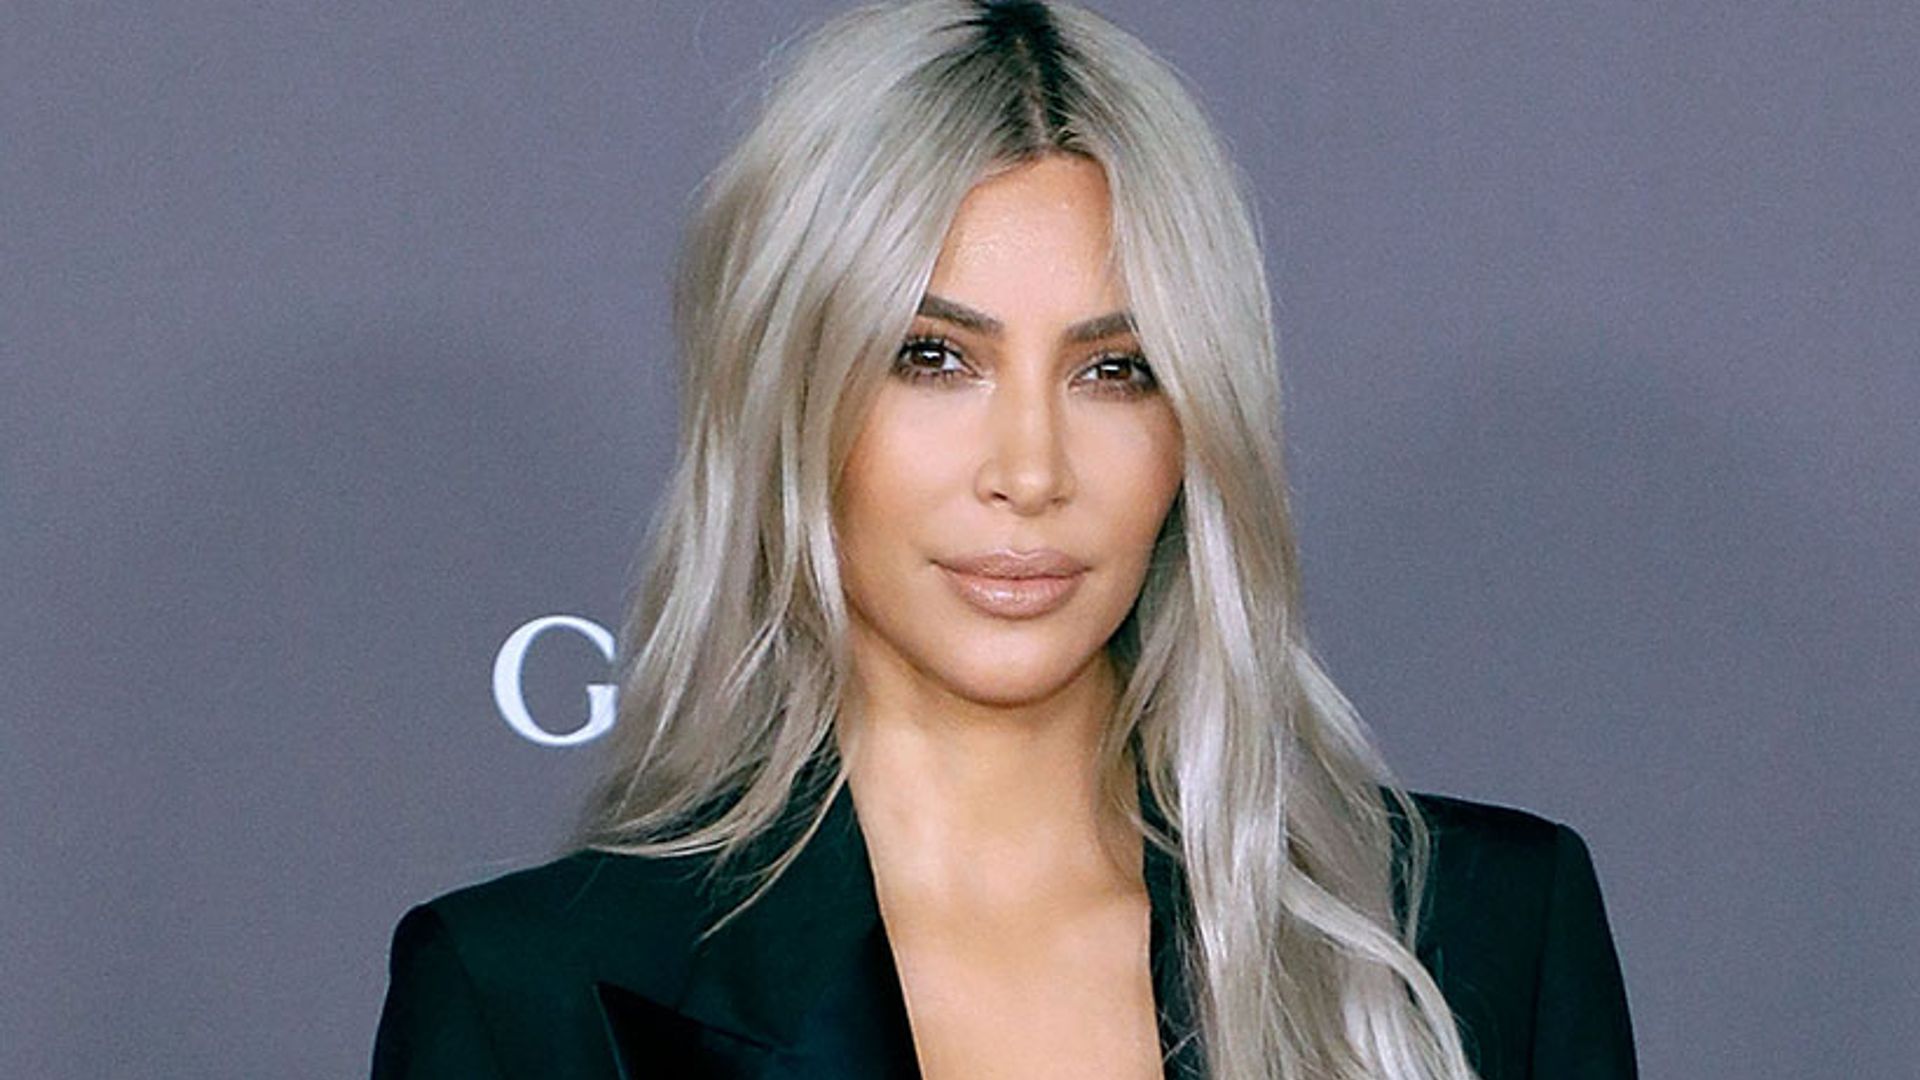 Kim Kardashian shares first picture since third baby's arrival - see it here